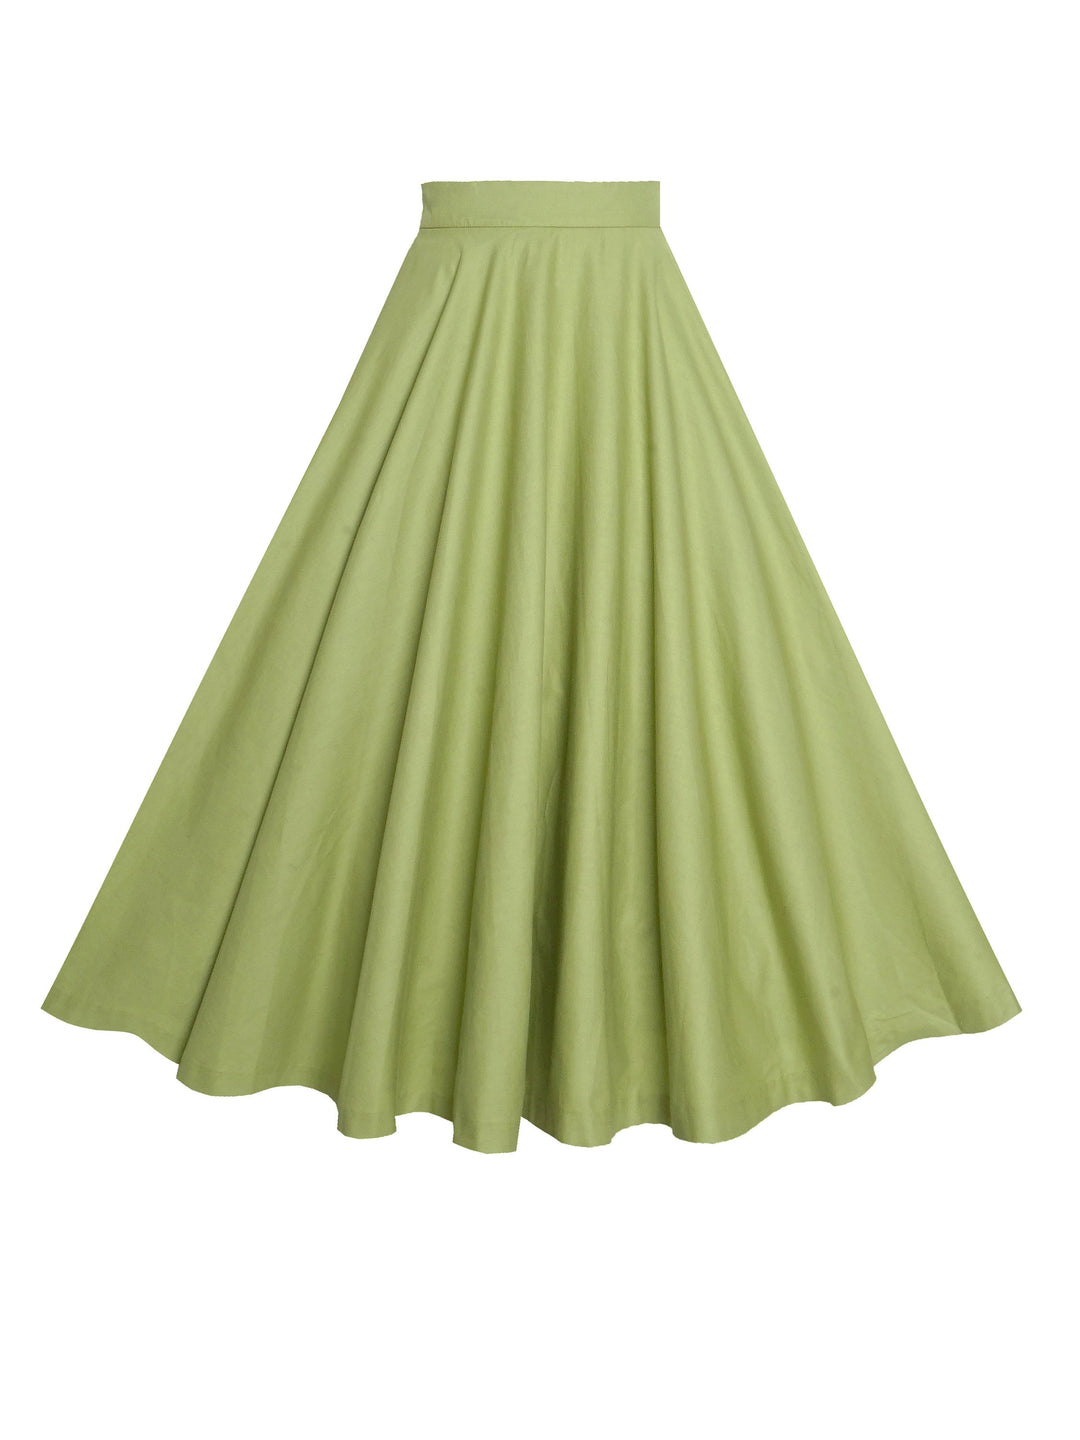 RTS - Size L - Lindy Skirt in Matcha Green Cotton